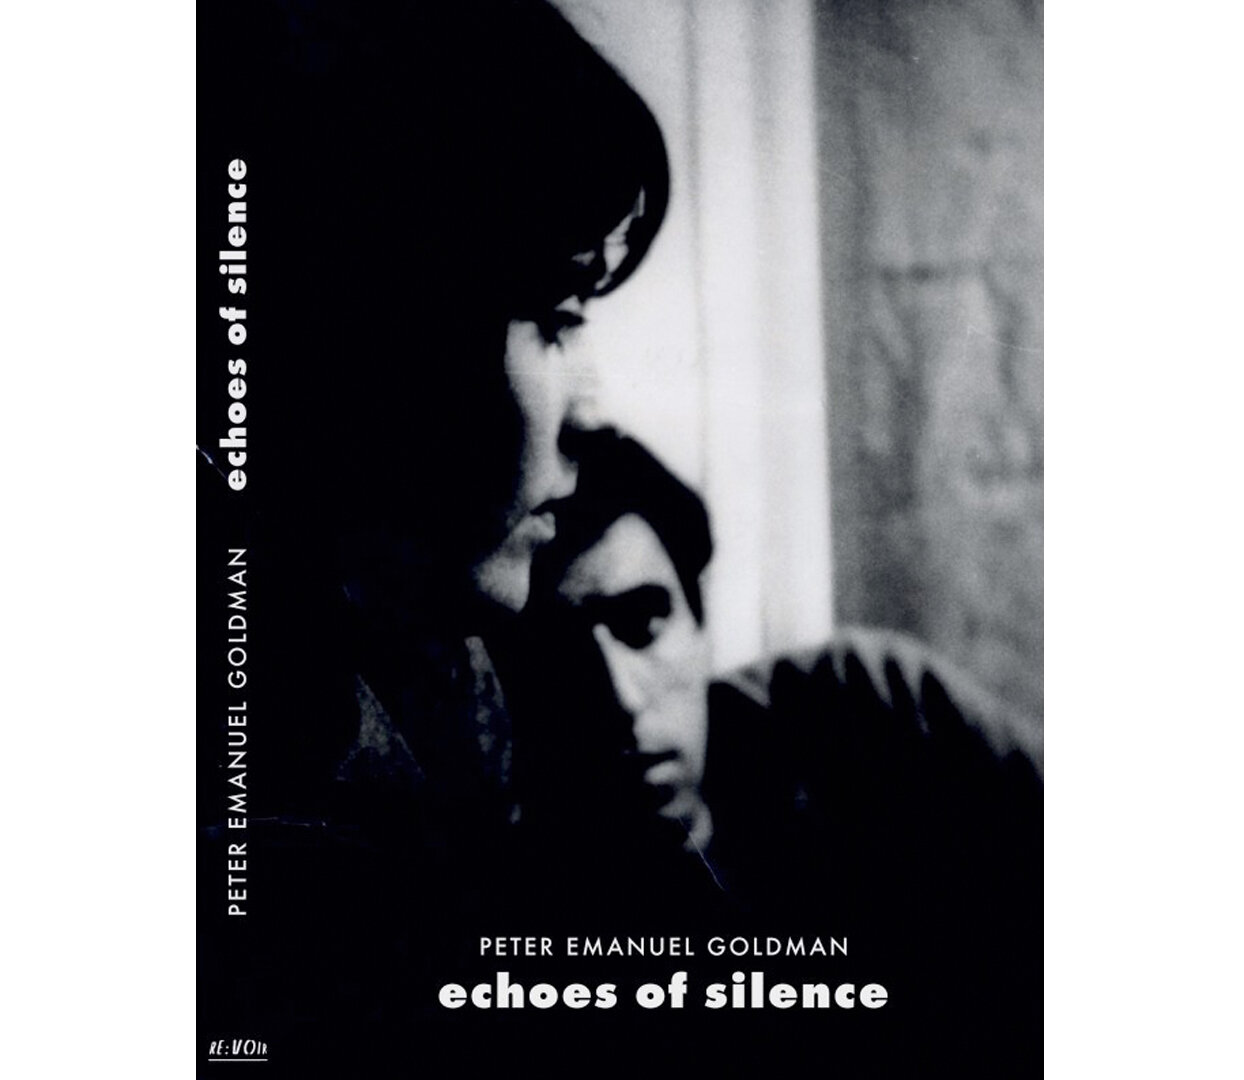 echoes of silence cover.jpg